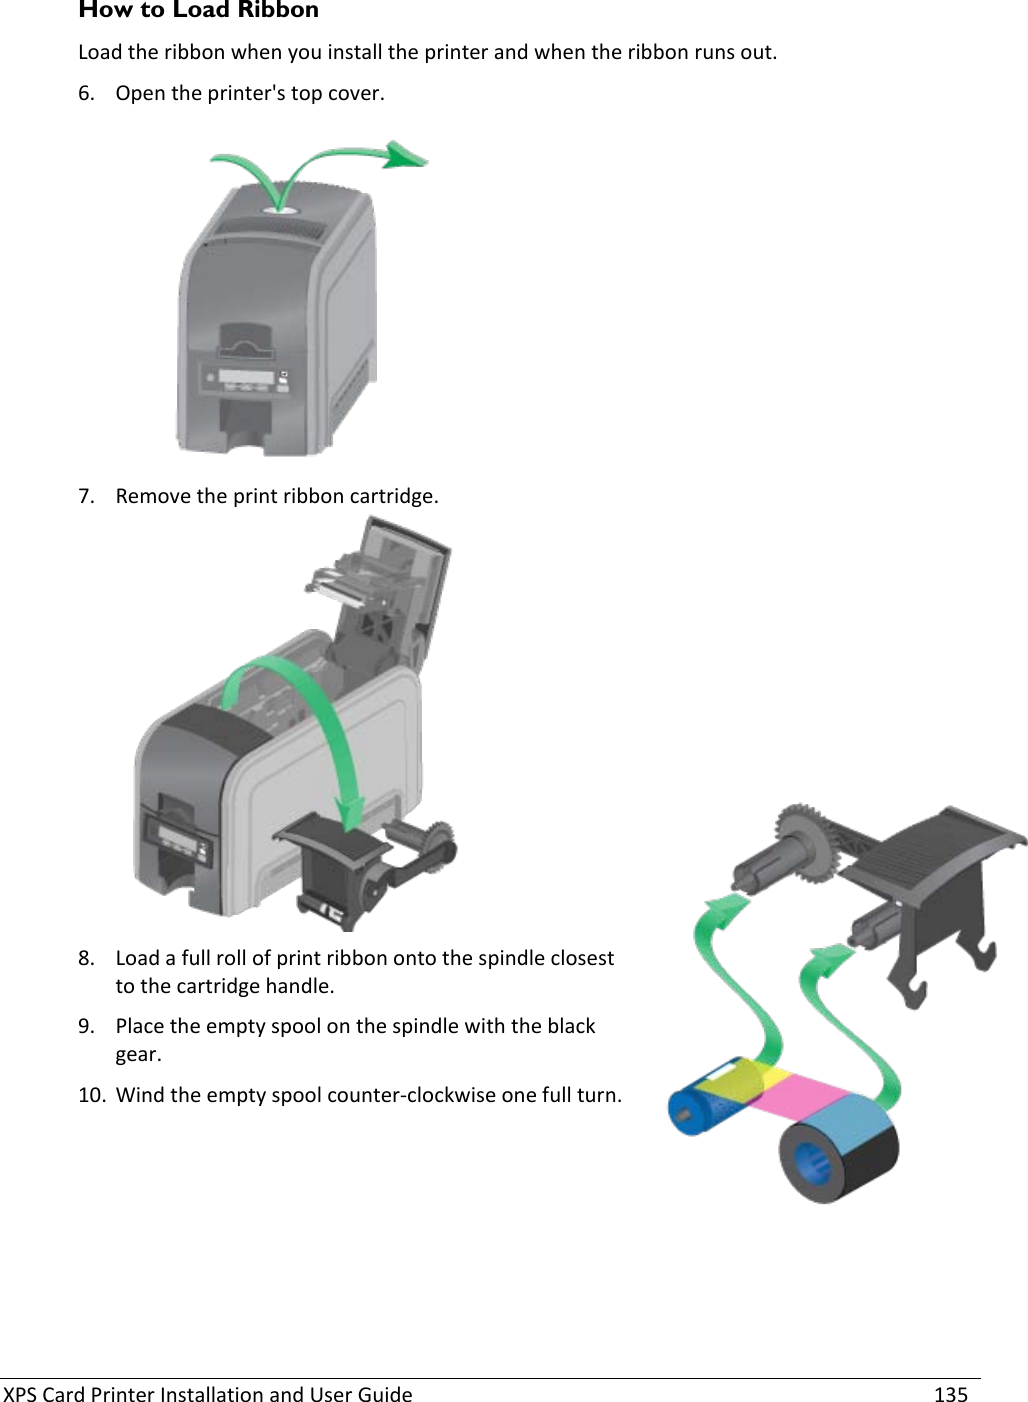 XPS Card Printer Installation and User Guide    135 How to Load Ribbon  Load the ribbon when you install the printer and when the ribbon runs out.  6. Open the printer&apos;s top cover.   7. Remove the print ribbon cartridge.  8. Load a full roll of print ribbon onto the spindle closest to the cartridge handle.  9. Place the empty spool on the spindle with the black gear.  10. Wind the empty spool counter-clockwise one full turn.  